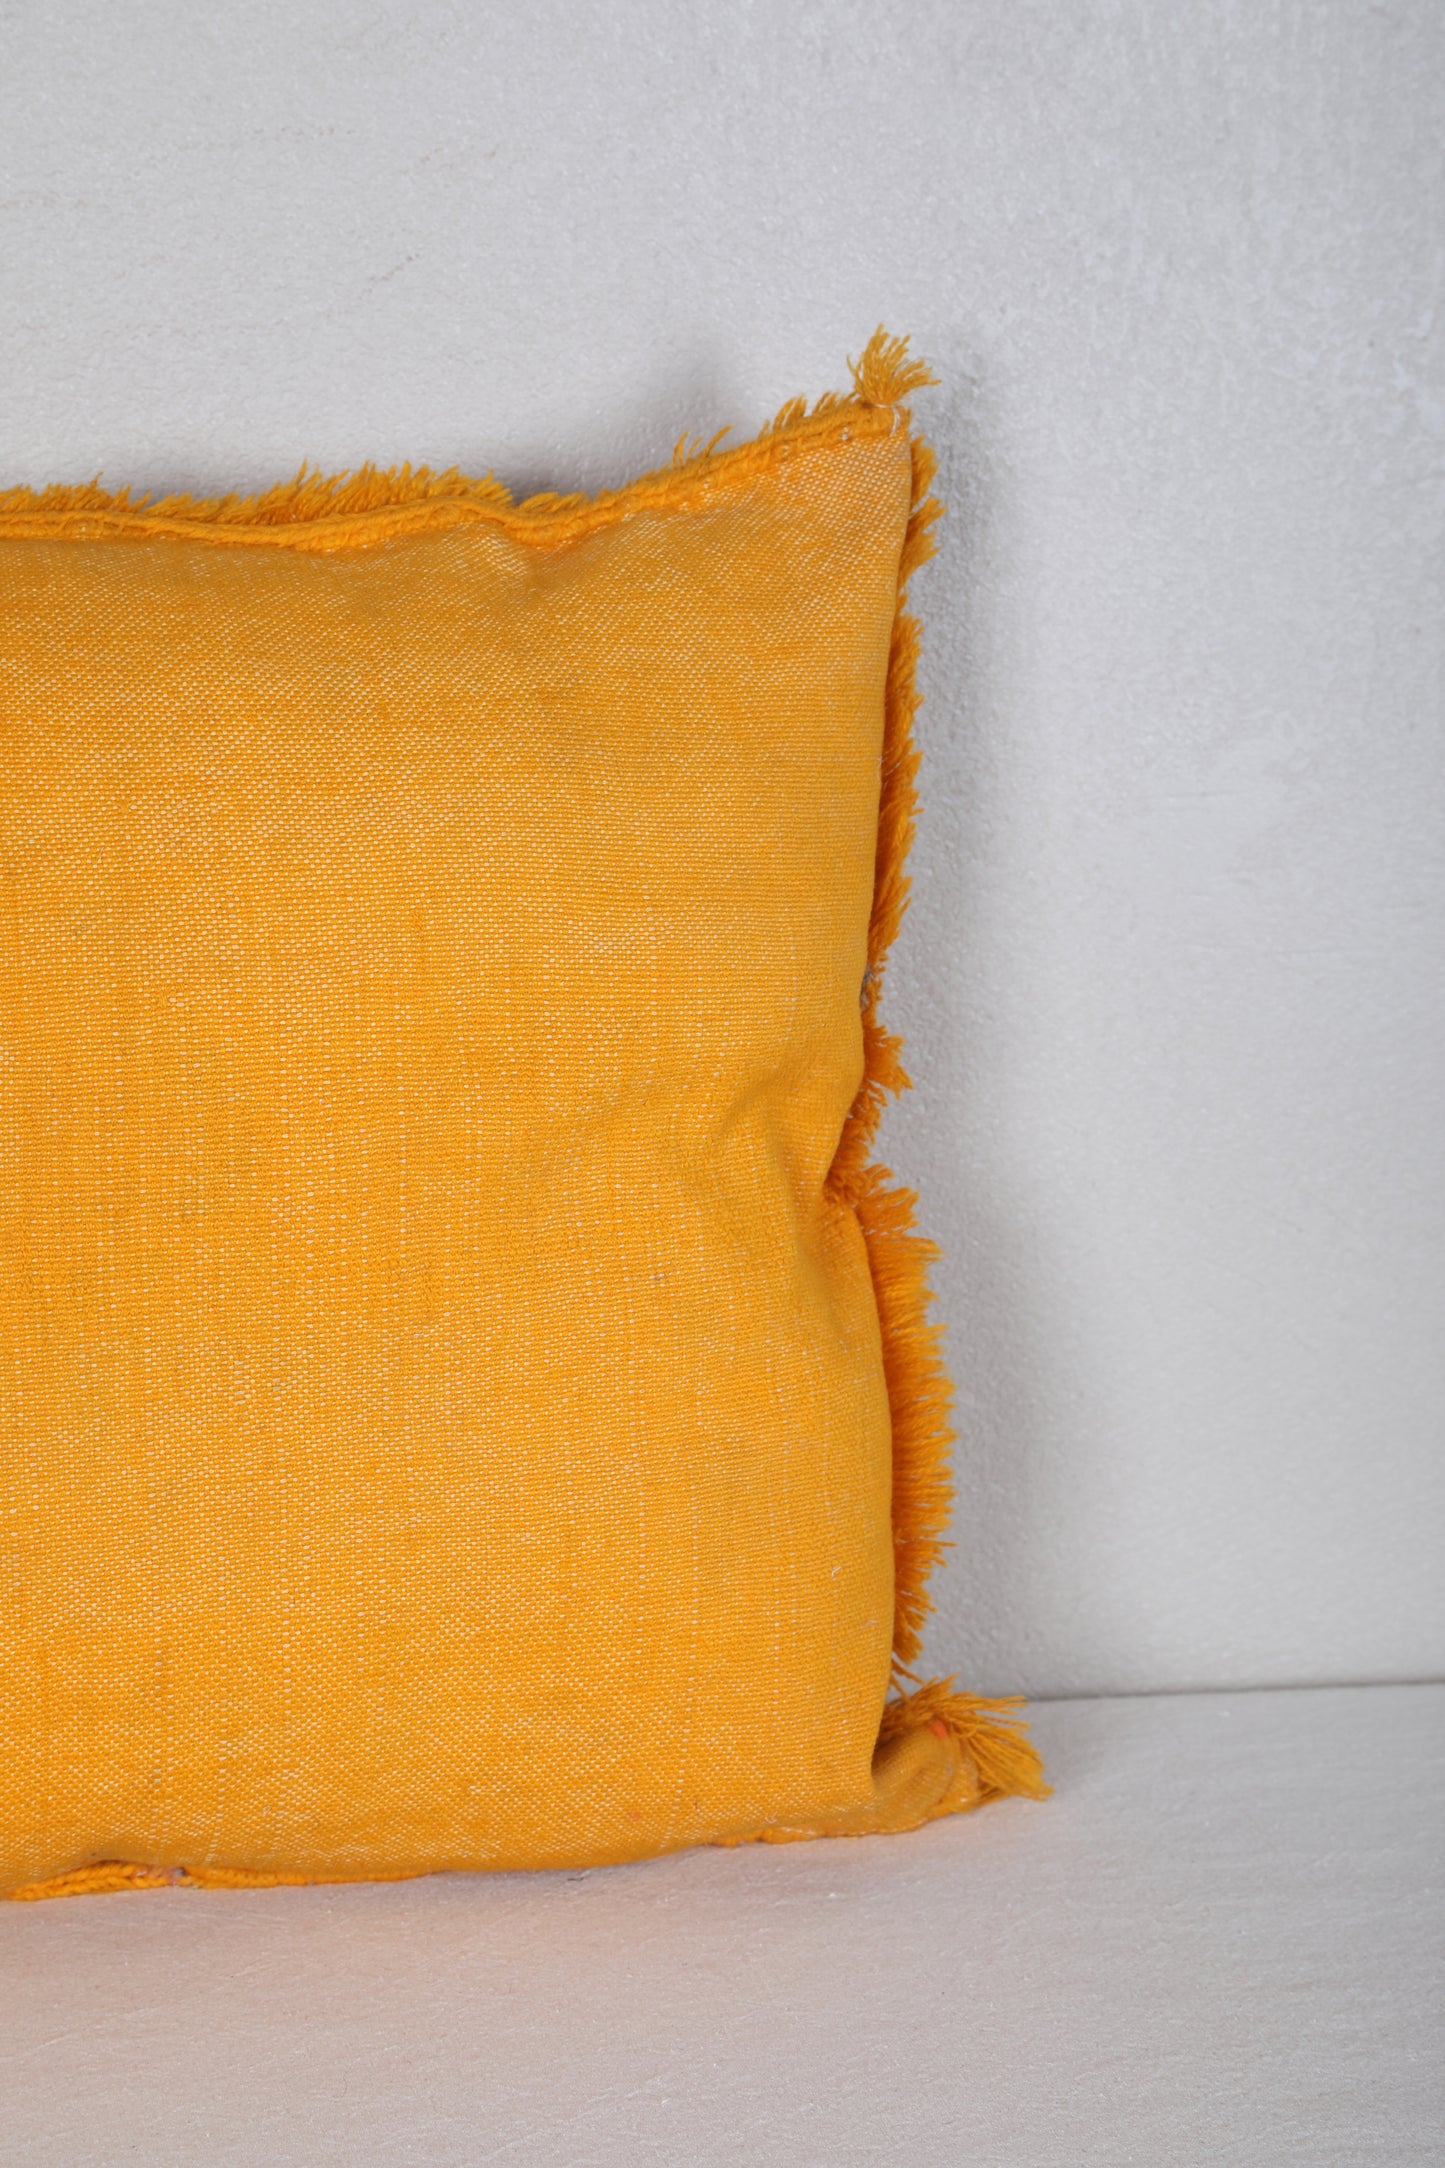 Yellow Blanket Pillow 16.9 INCHES X 18.5 INCHES